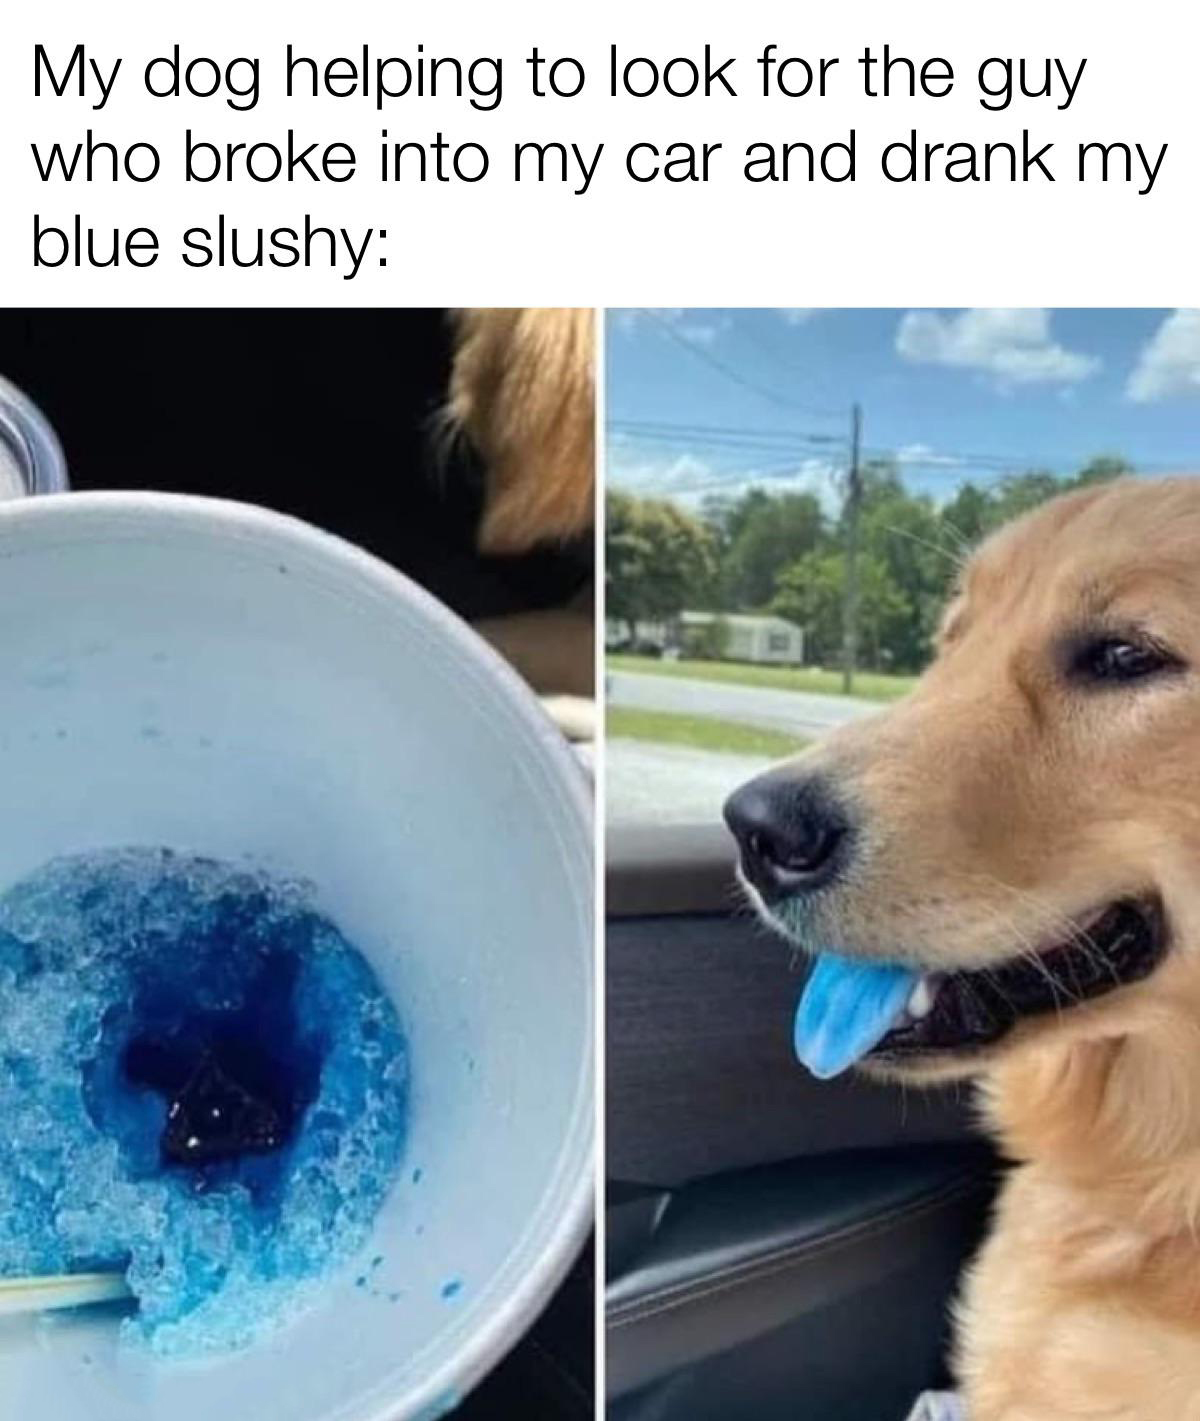 funny memes - dog - My dog helping to look for the guy who broke into my car and drank my blue slushy